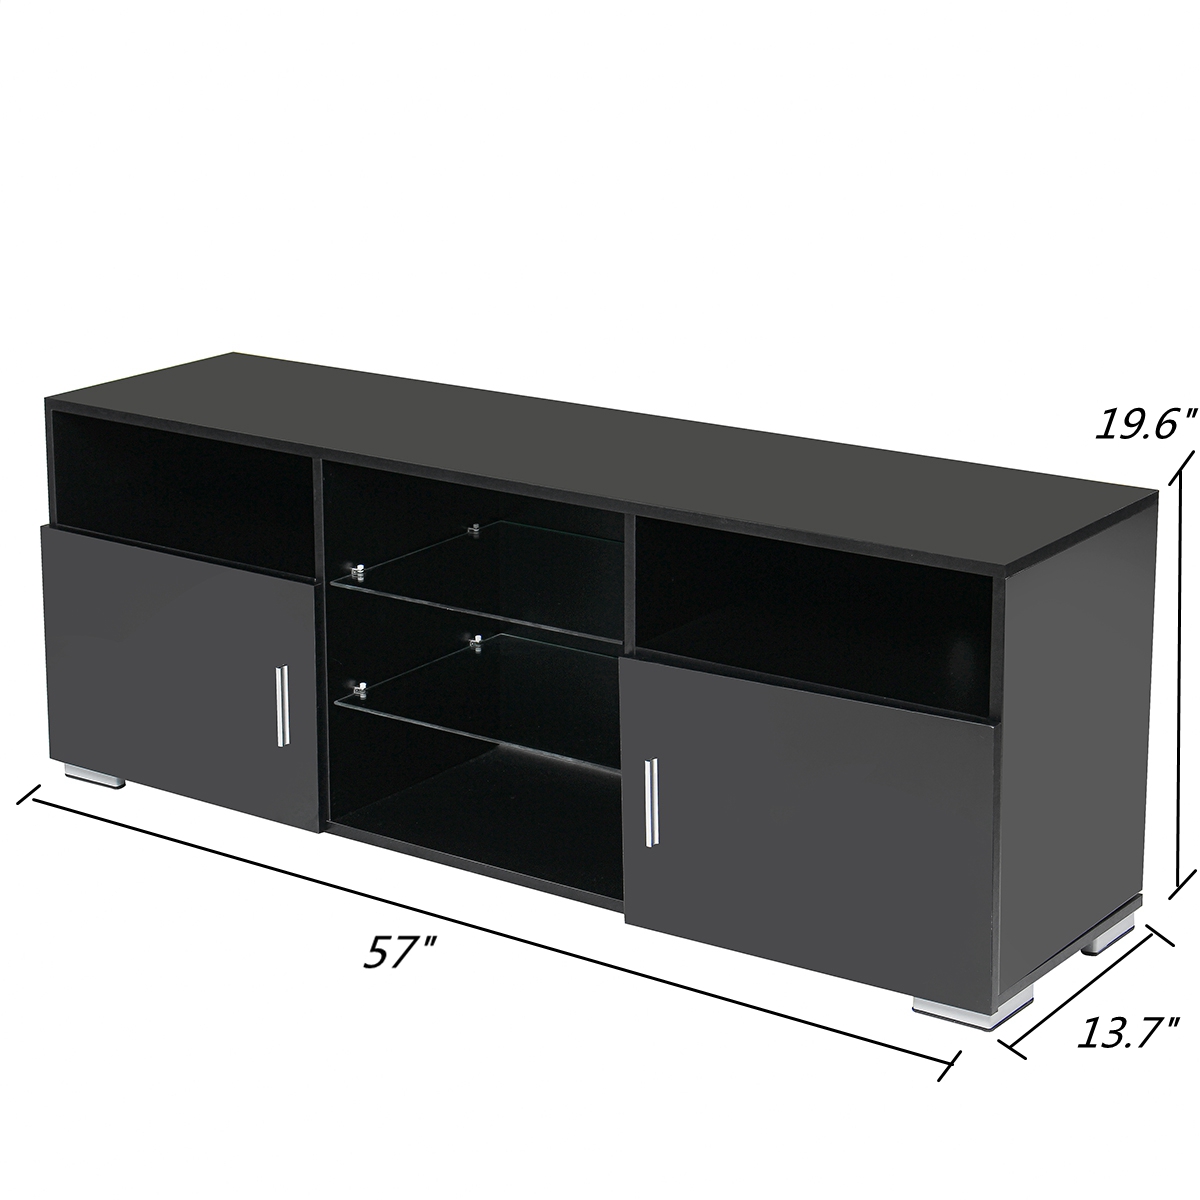 57 Inch High Gloss TV Stand Cabinet with LED Light TV Unit Bracket Home Furnishings TV Stands Living Room Furniture US Shipping